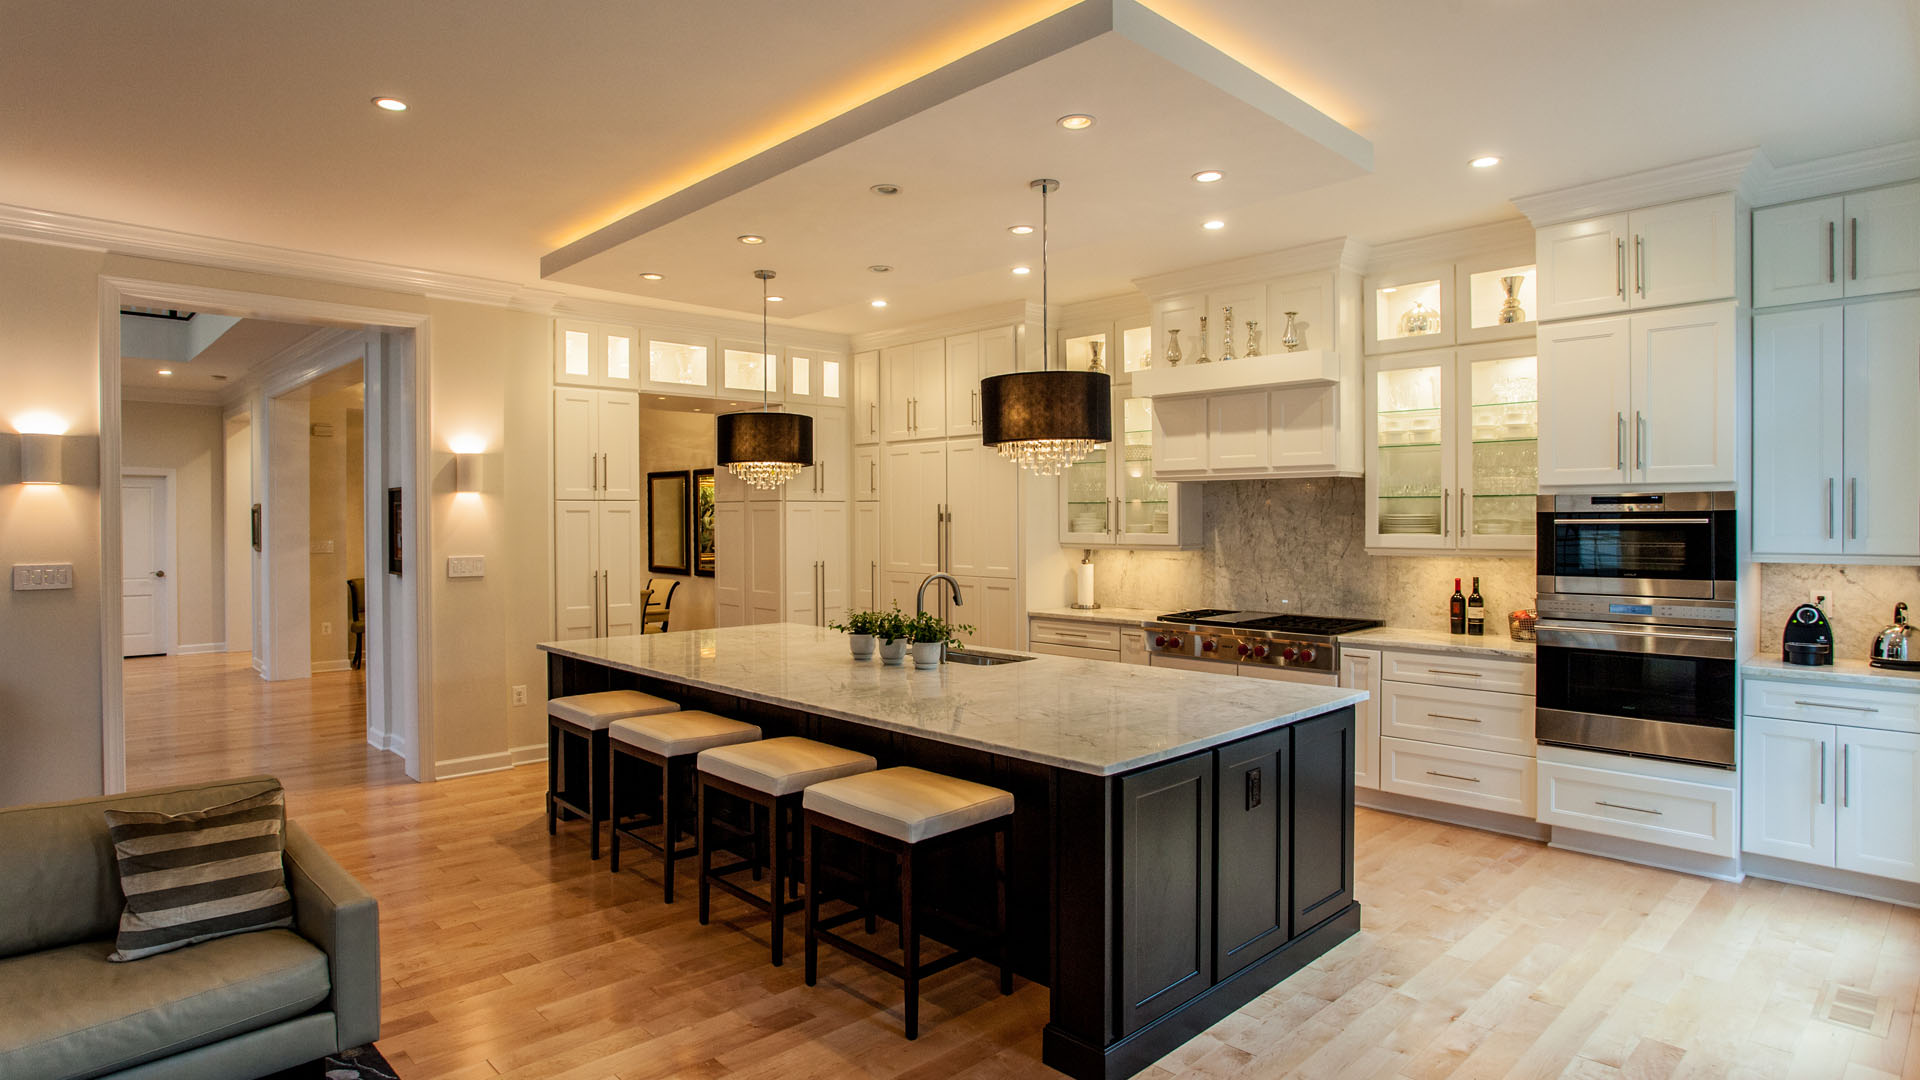 2014 NAHB Best Of American Living Awards (BALA)  Silver Award Winner, Entire Whole Remodel up to $250,000